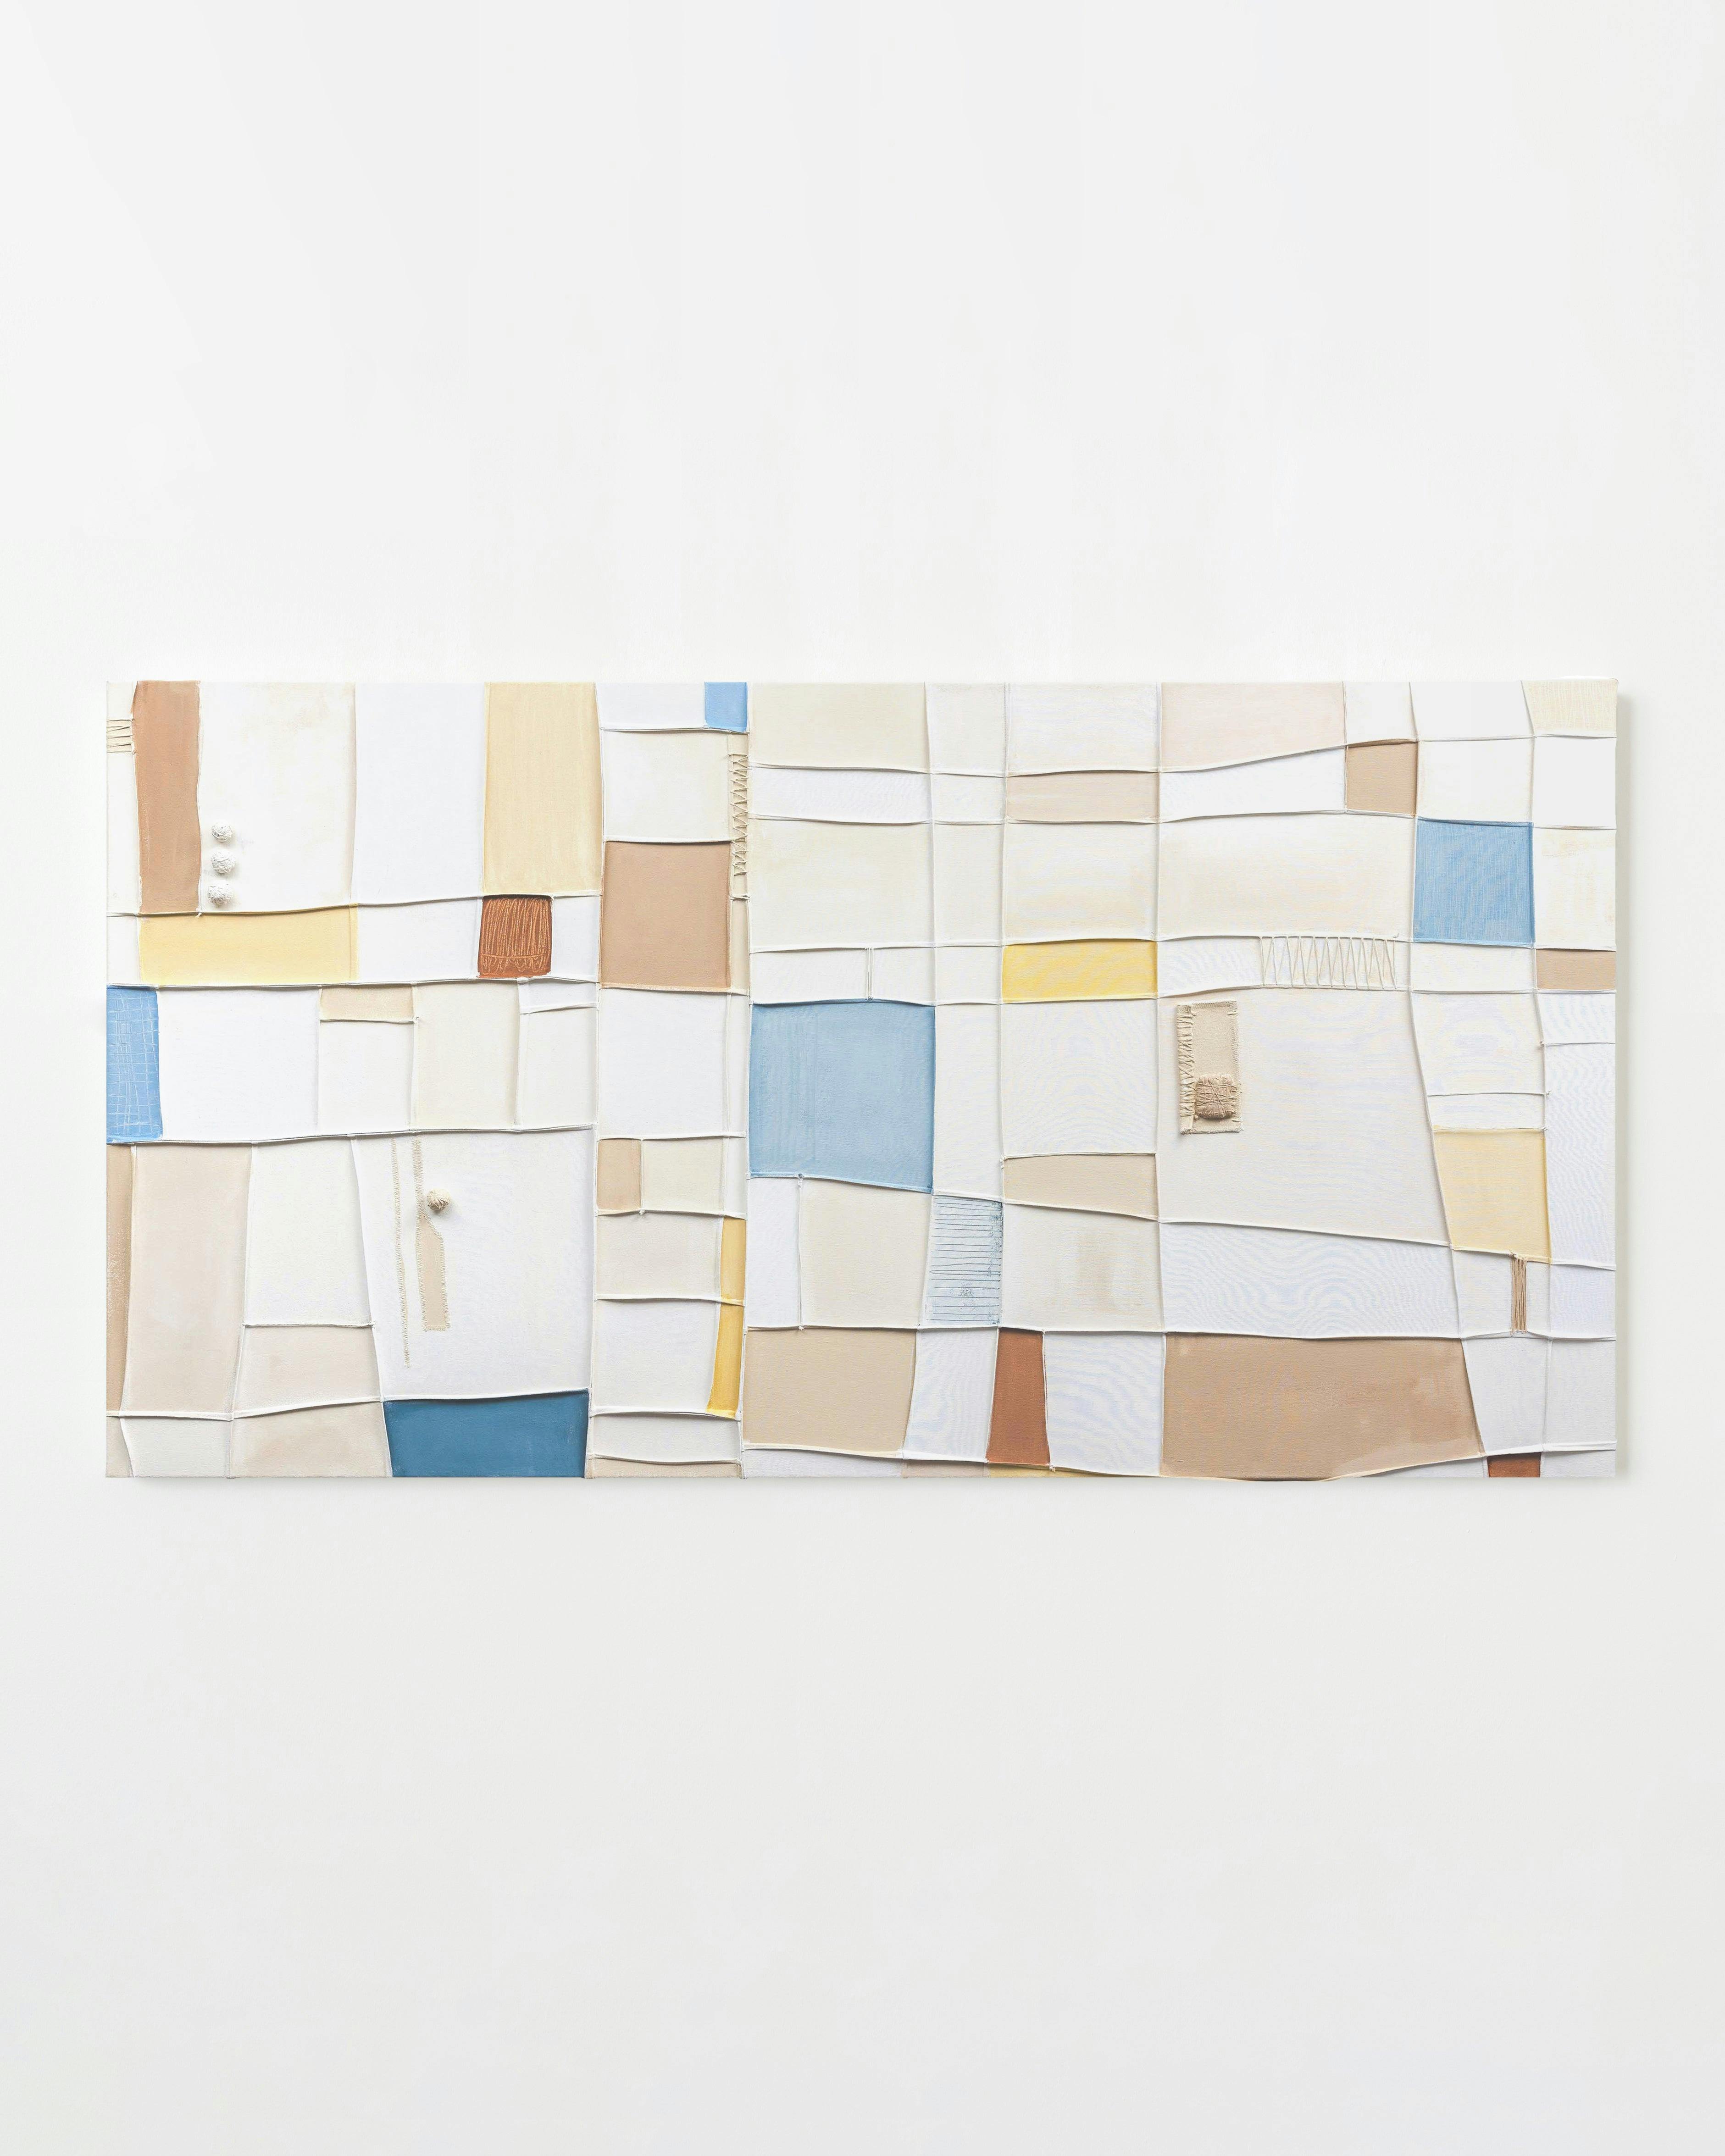 Painting by Nicole Anastas titled "Compartments 65".